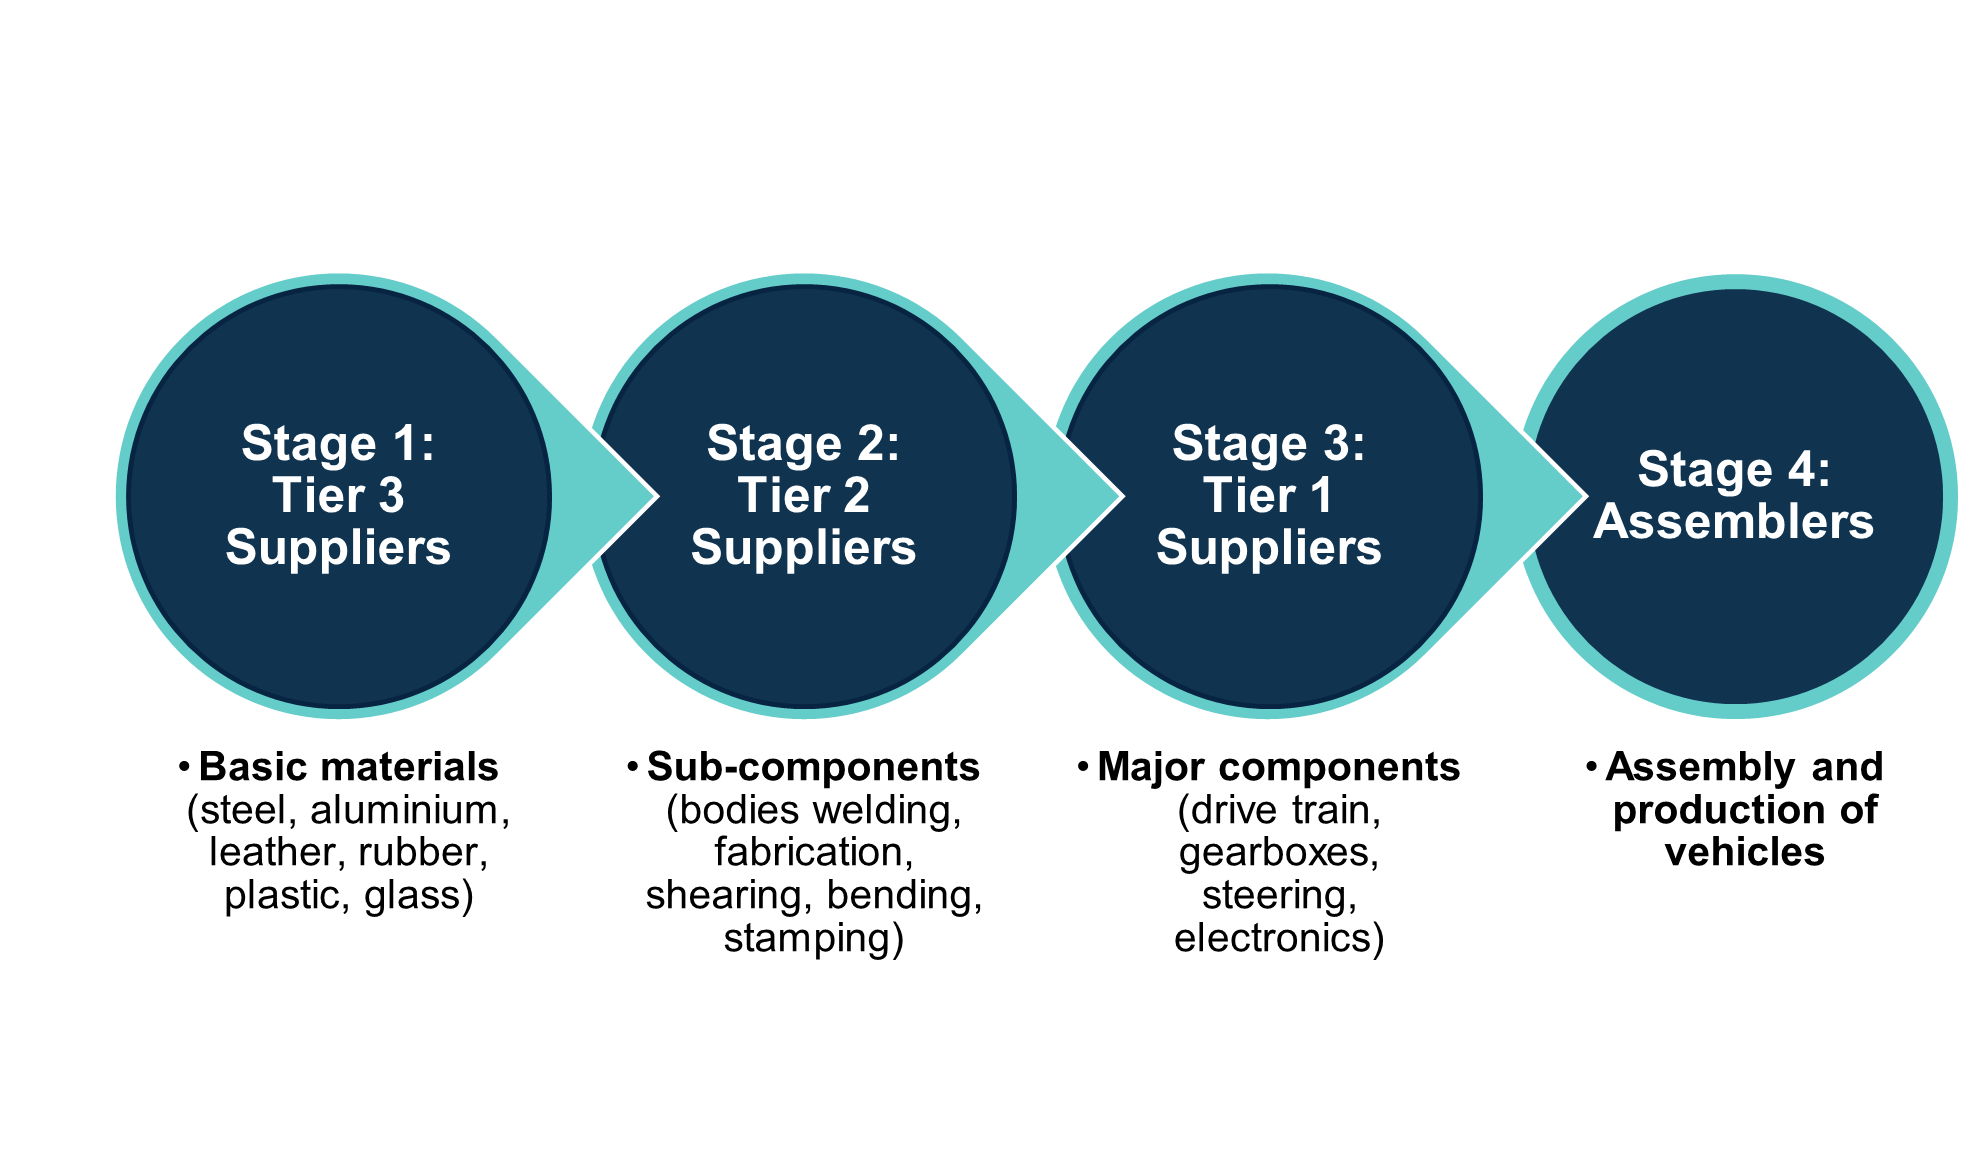 Figure X: 4-step value chains to assemble or produce fully-built units of vehicles and components.